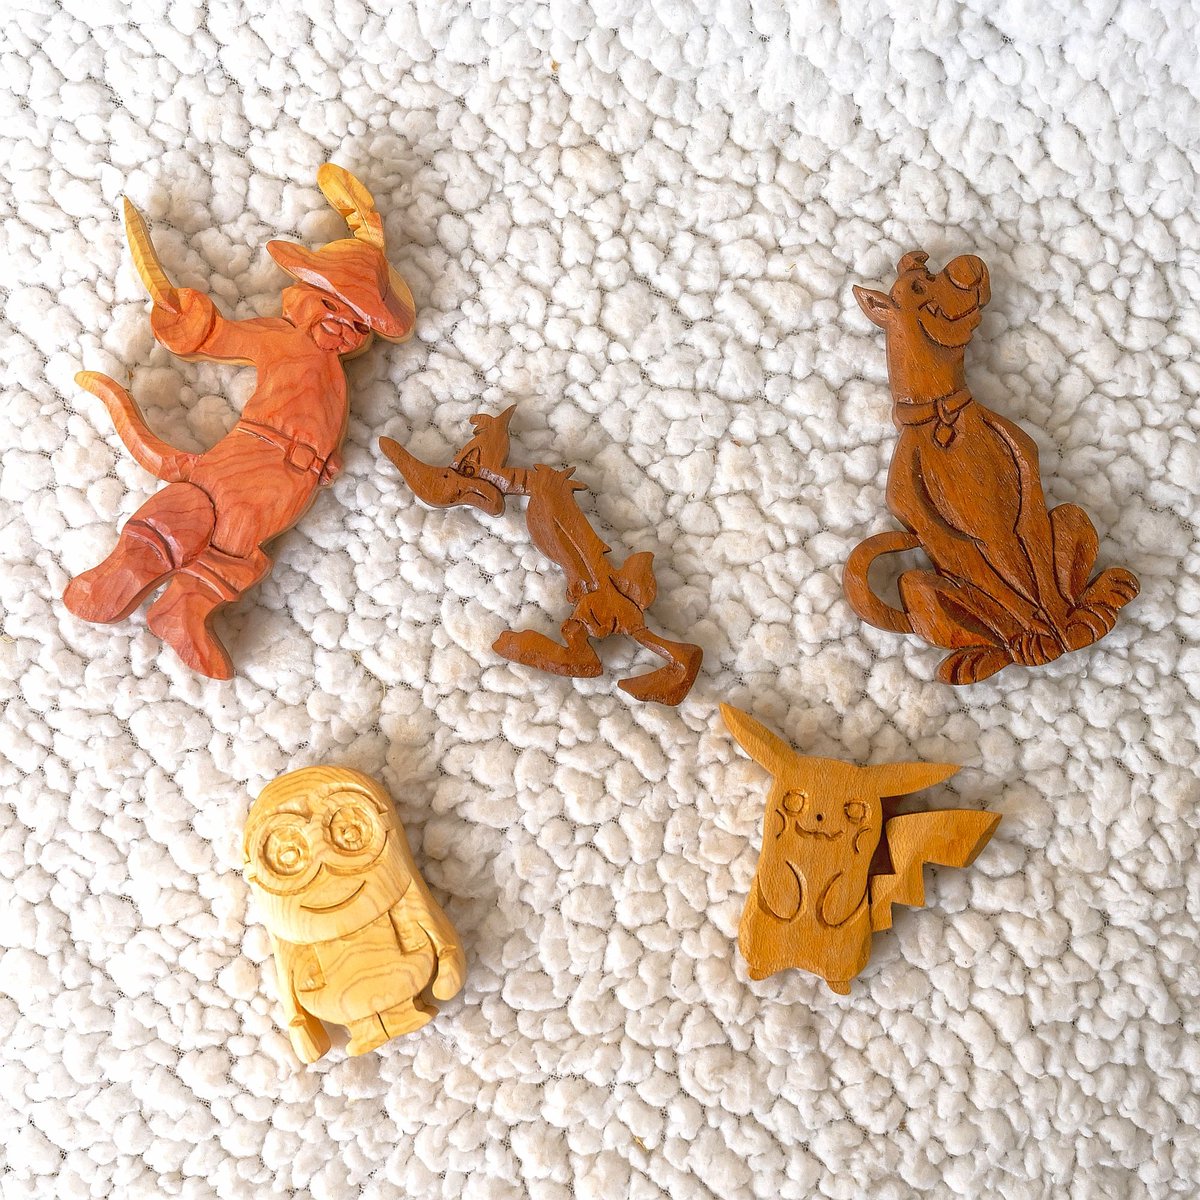 Having fun making some cartoon characters in wood a few months ago. Check out the link below to see how we made them.

youtu.be/6BzInytPifU

#pussinboots #minions #daffyduck #scoobydoo #pikachu #woodcarving #woodwork #scrollsaw